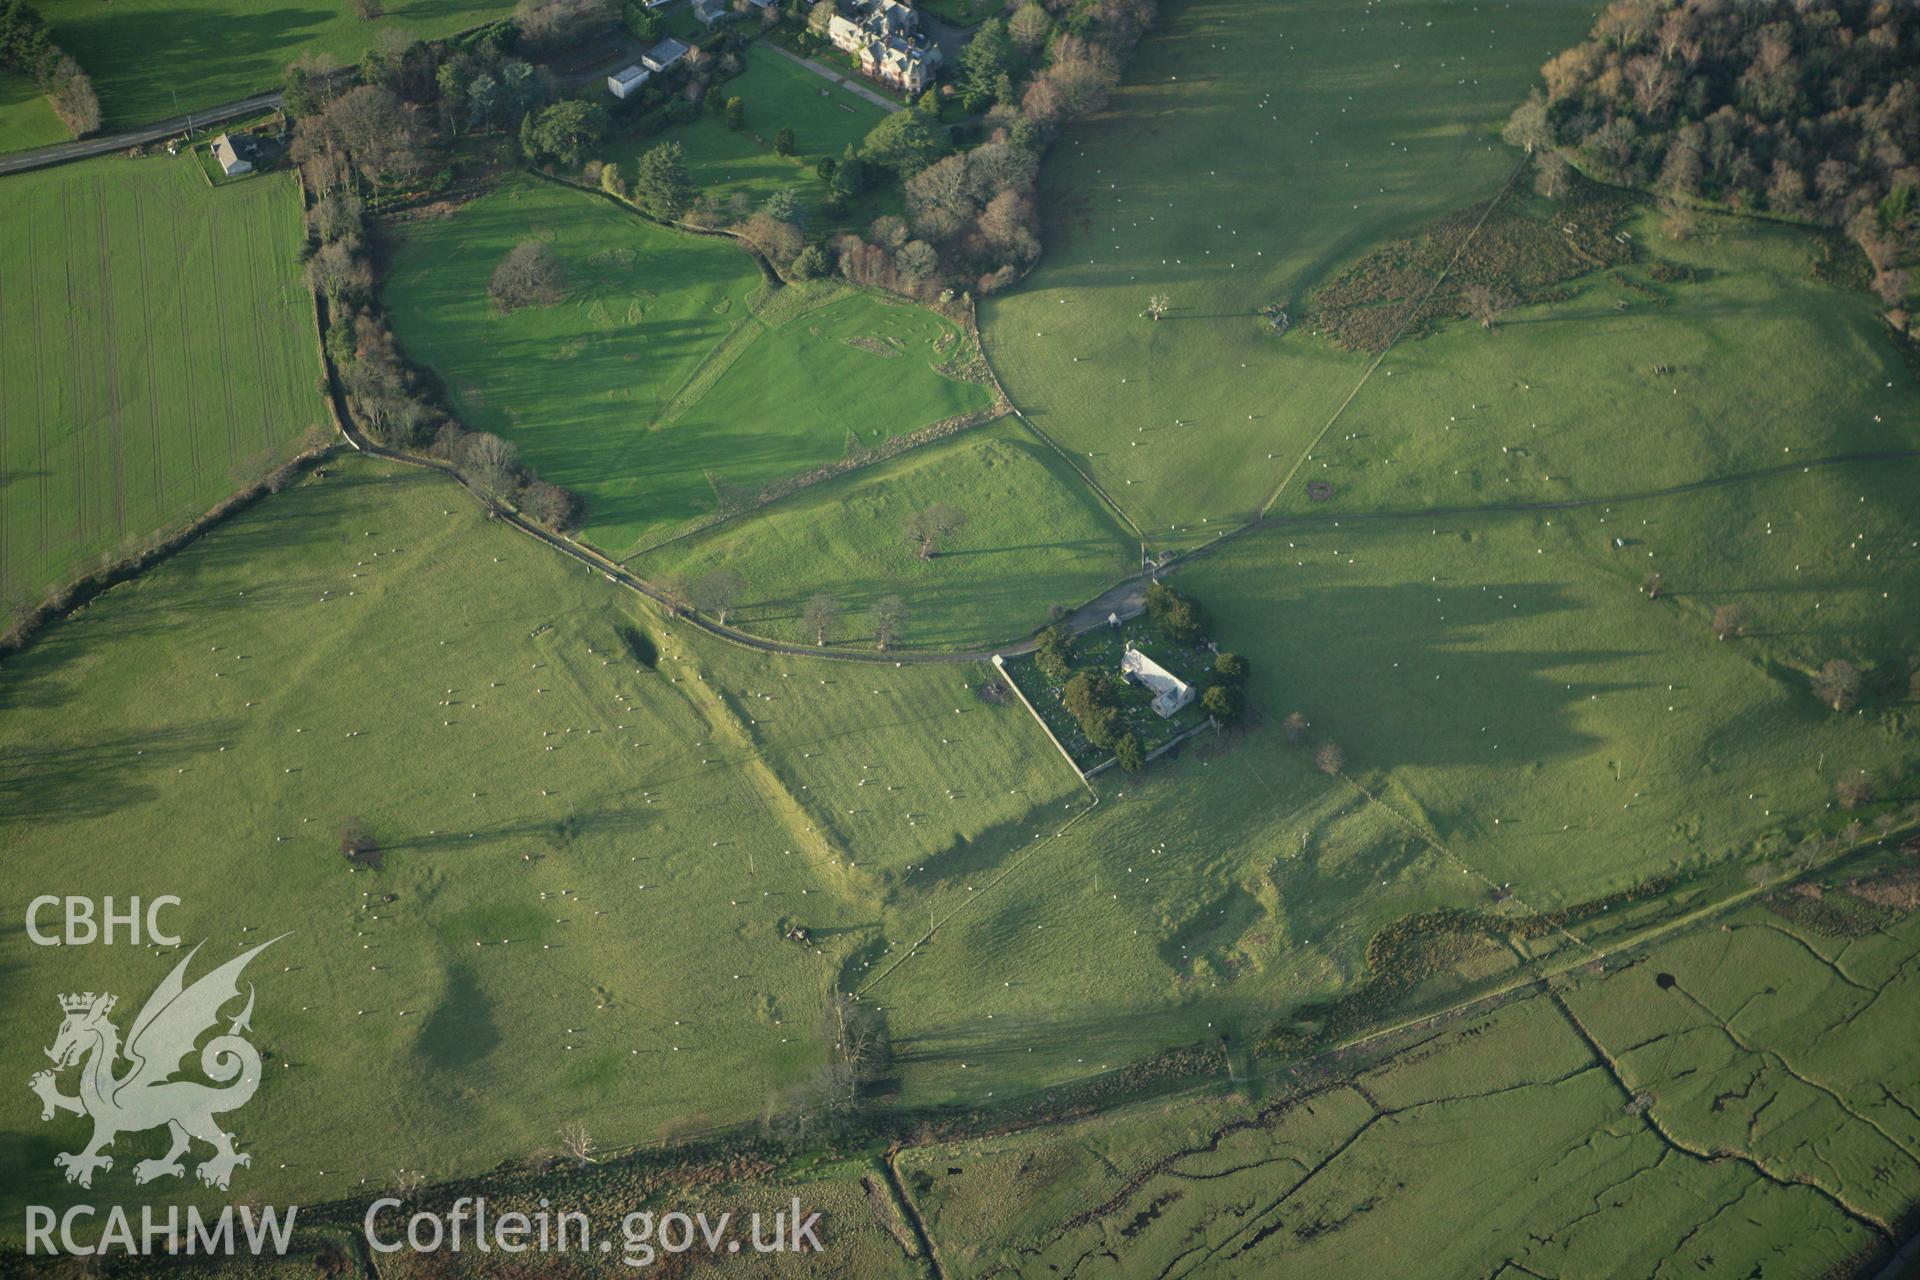 RCAHMW colour oblique aerial photograph of Kanovium (or Canovium) Roman Military Settlement at Caerhun. Taken on 10 December 2009 by Toby Driver